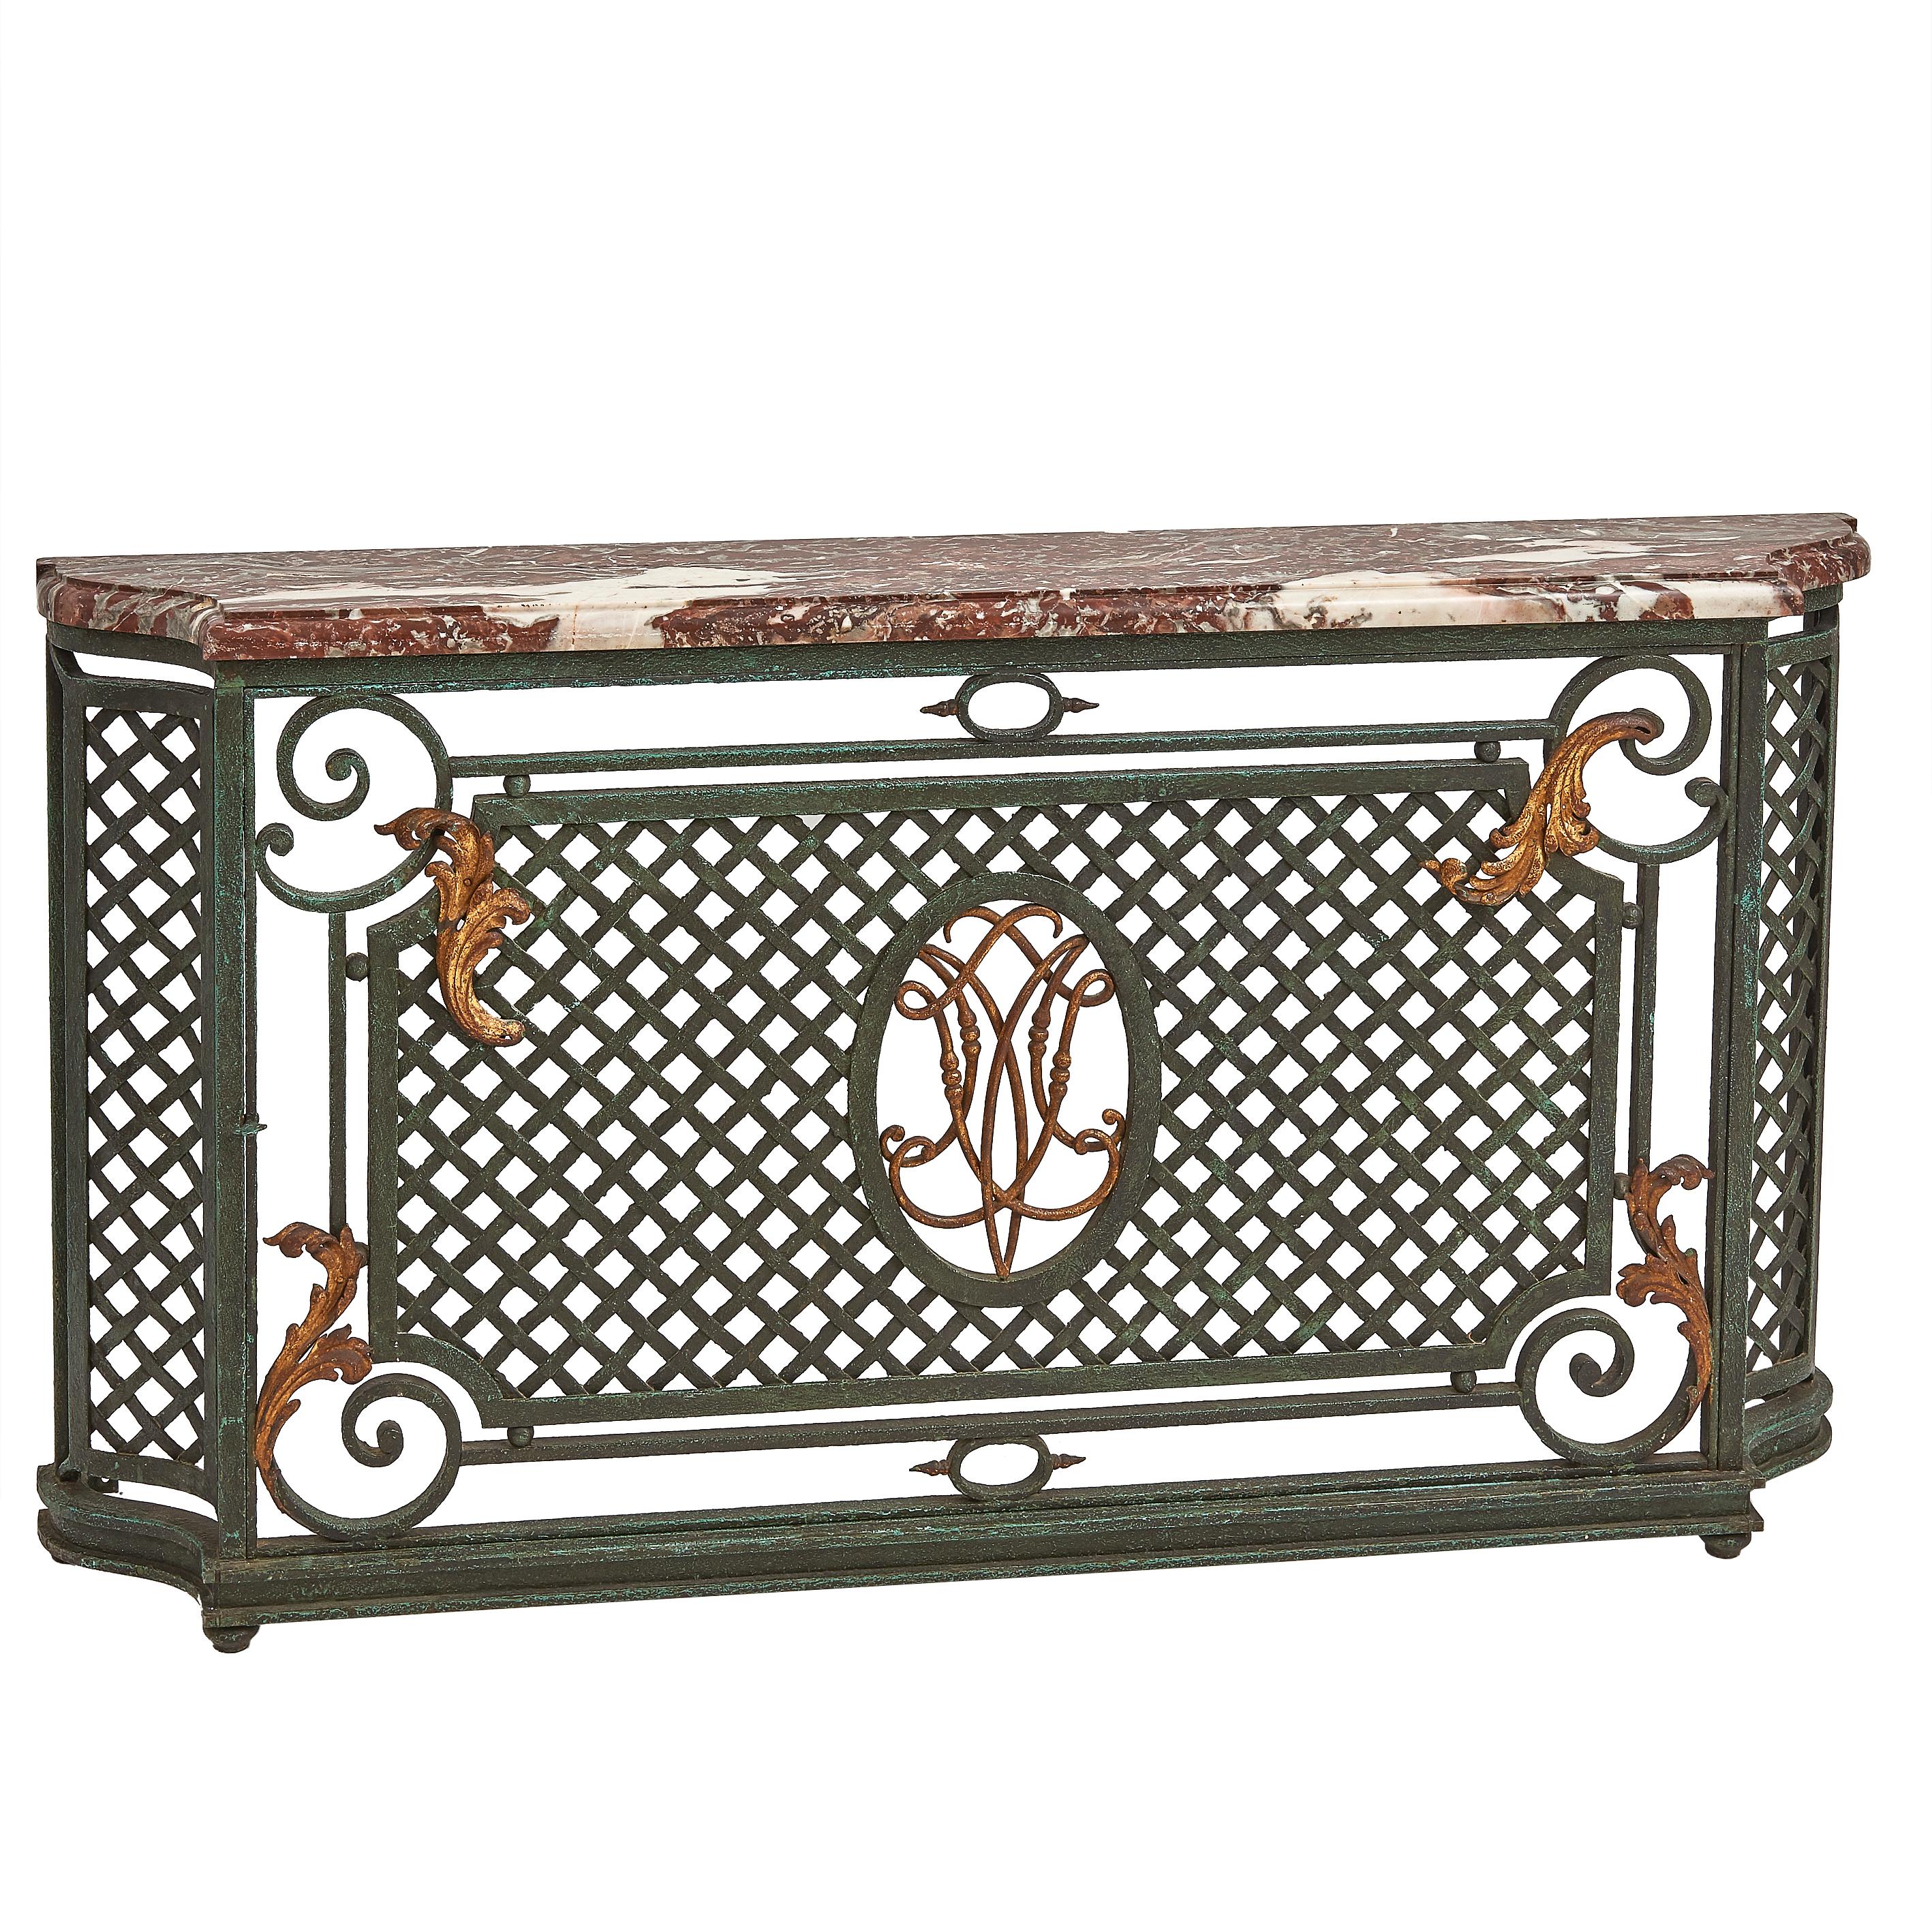 French Painted Wrought Iron and Marble Radiator Cover, circa 1930